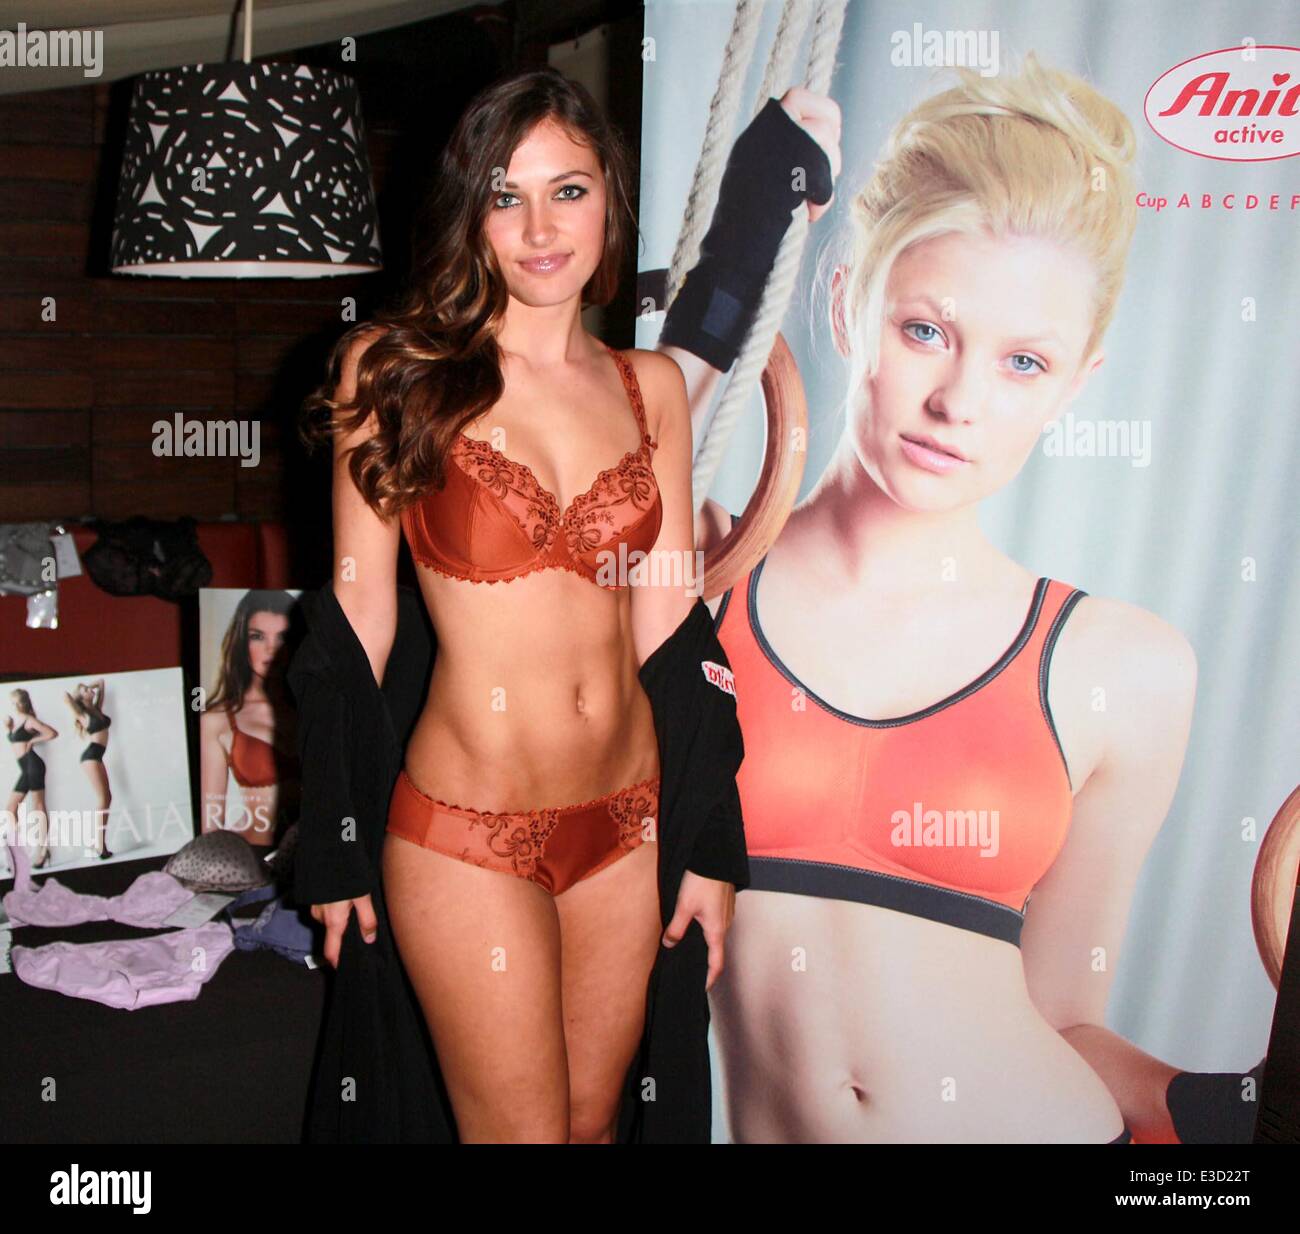 Mikayla Carr models for Anita Unique Bodywear at 'Designer's Night Out' at  Sofitel to kick off L.A. Fashion week Featuring: Mikayla Carr Where: Los  Angeles, CA, United States When: 04 Oct 2013